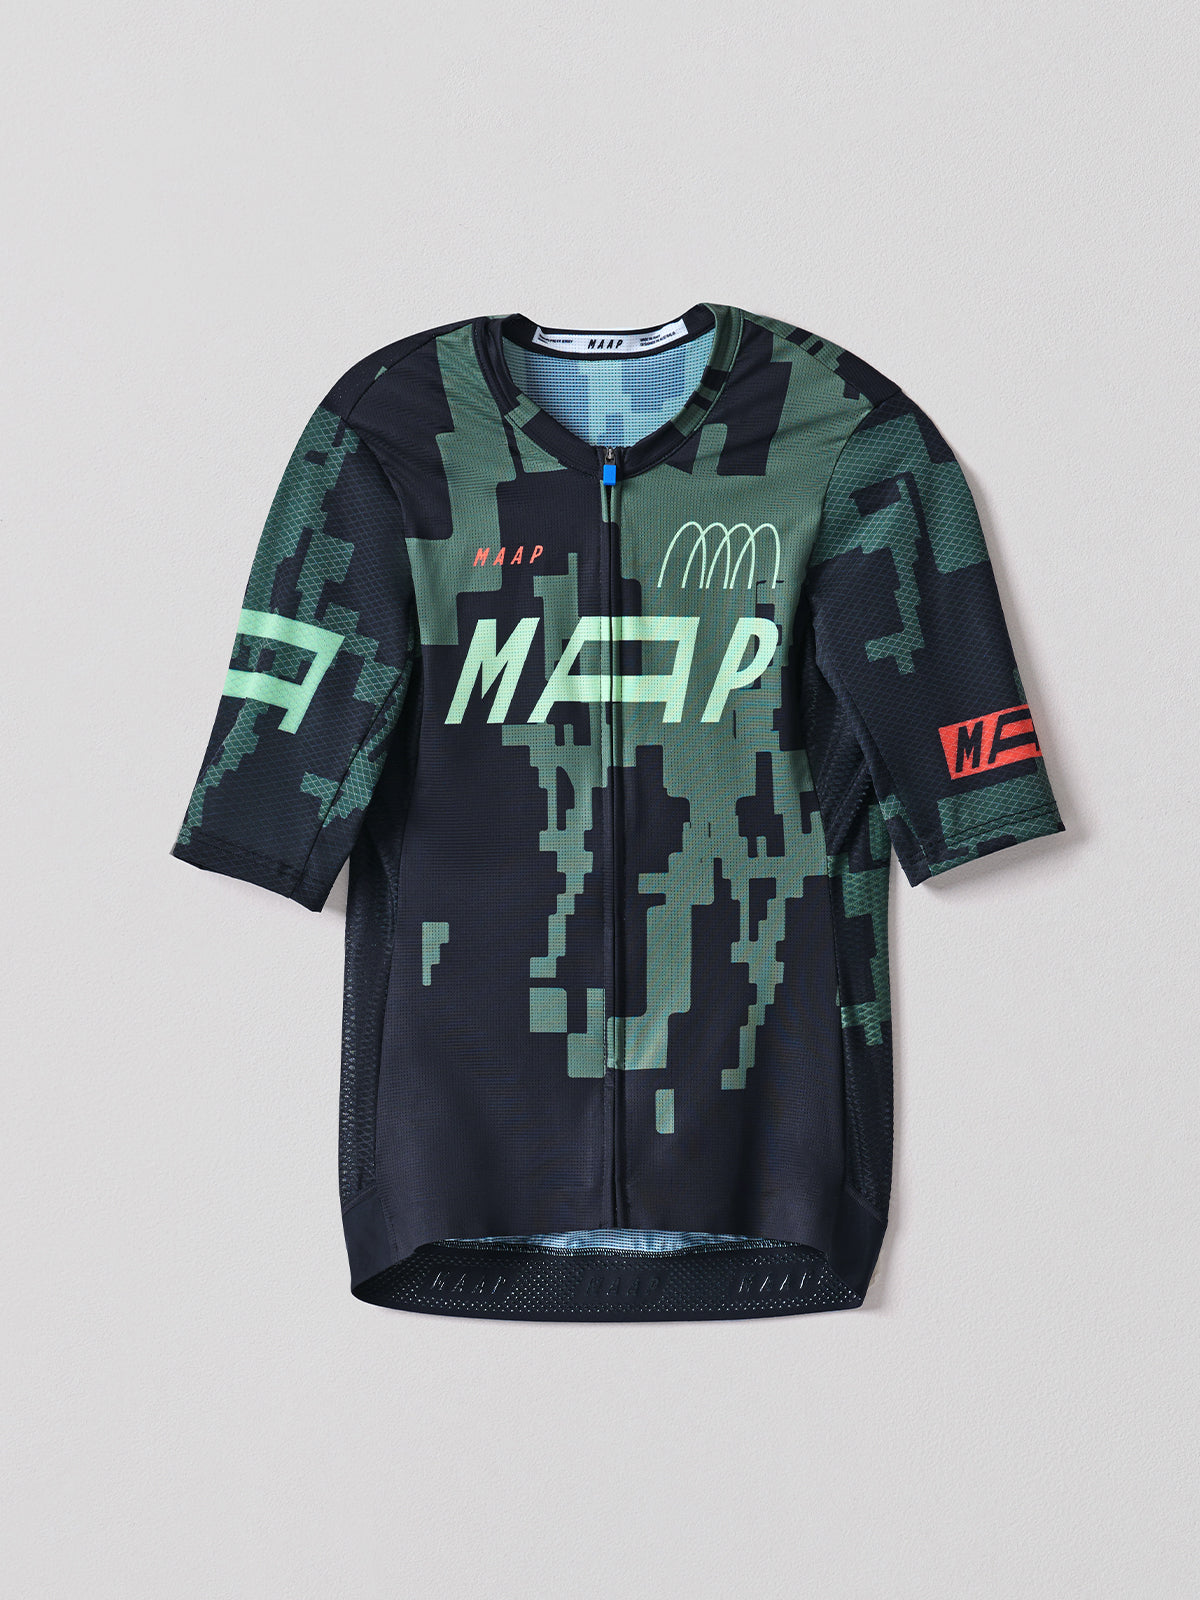 Women's Adapted F.O Pro Air Jersey